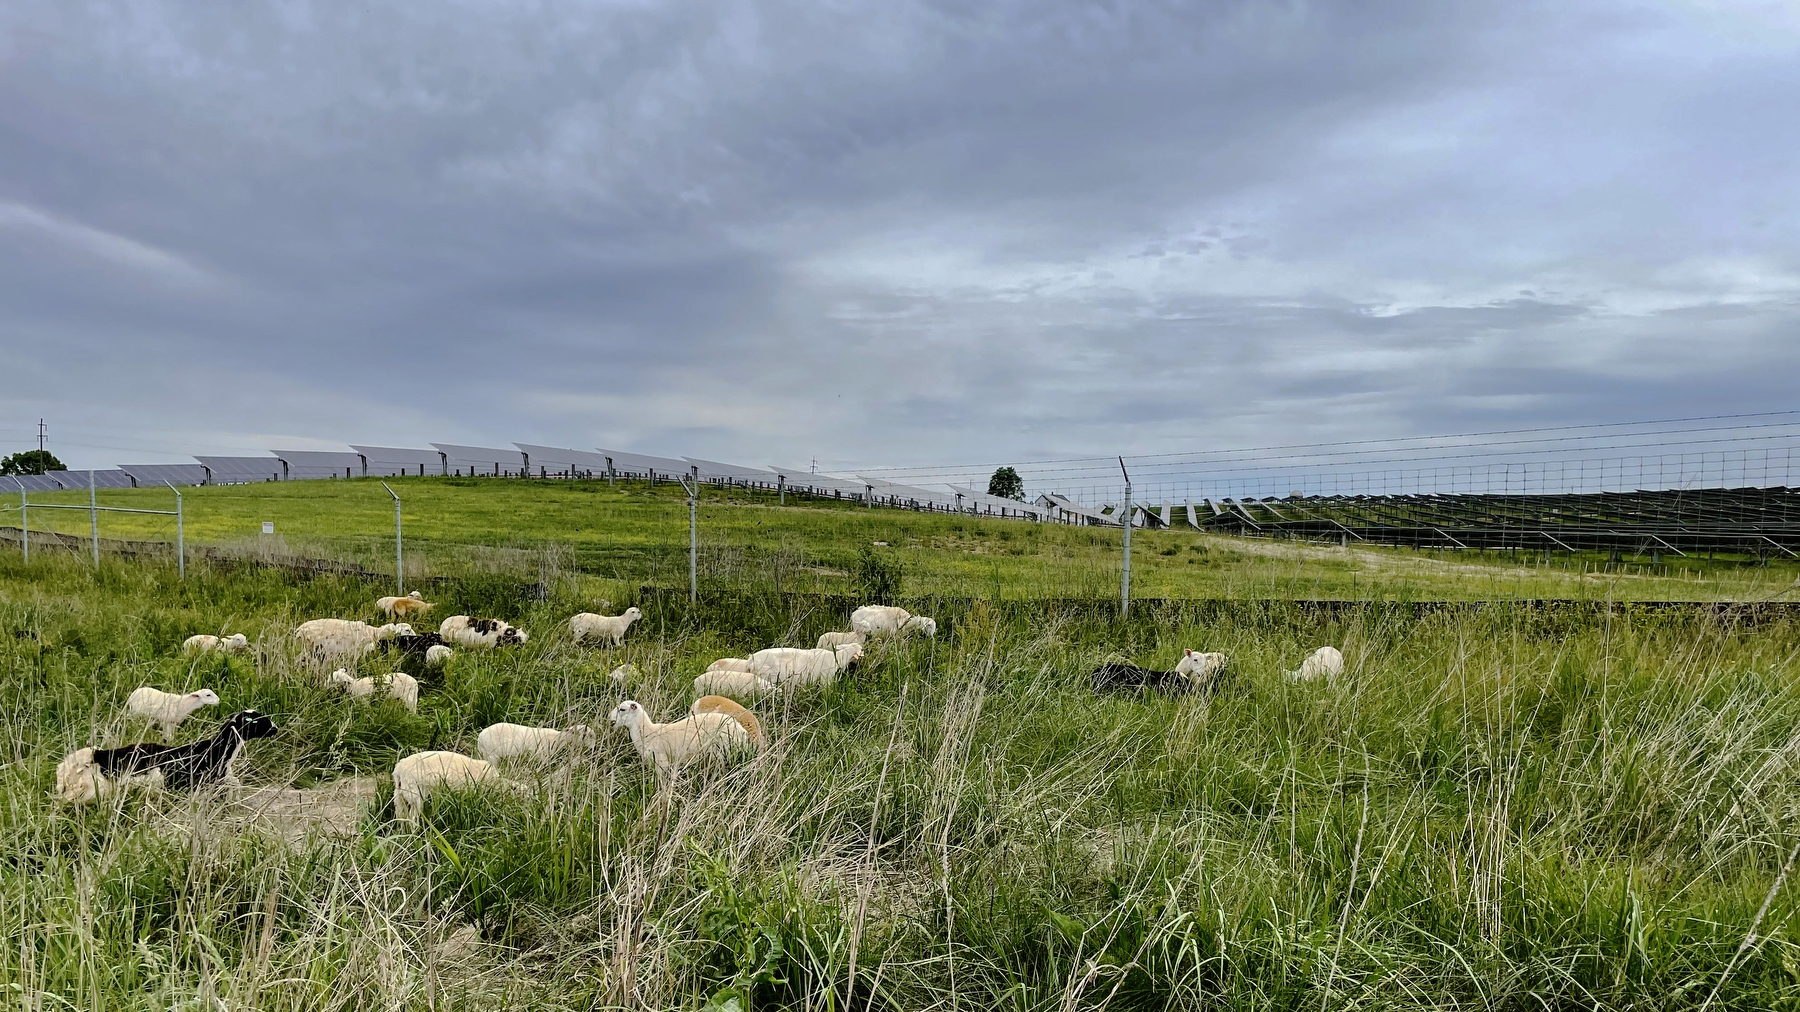 Sheep are shown grazing/lying in a green field outside a solar a farm during an overcast day.